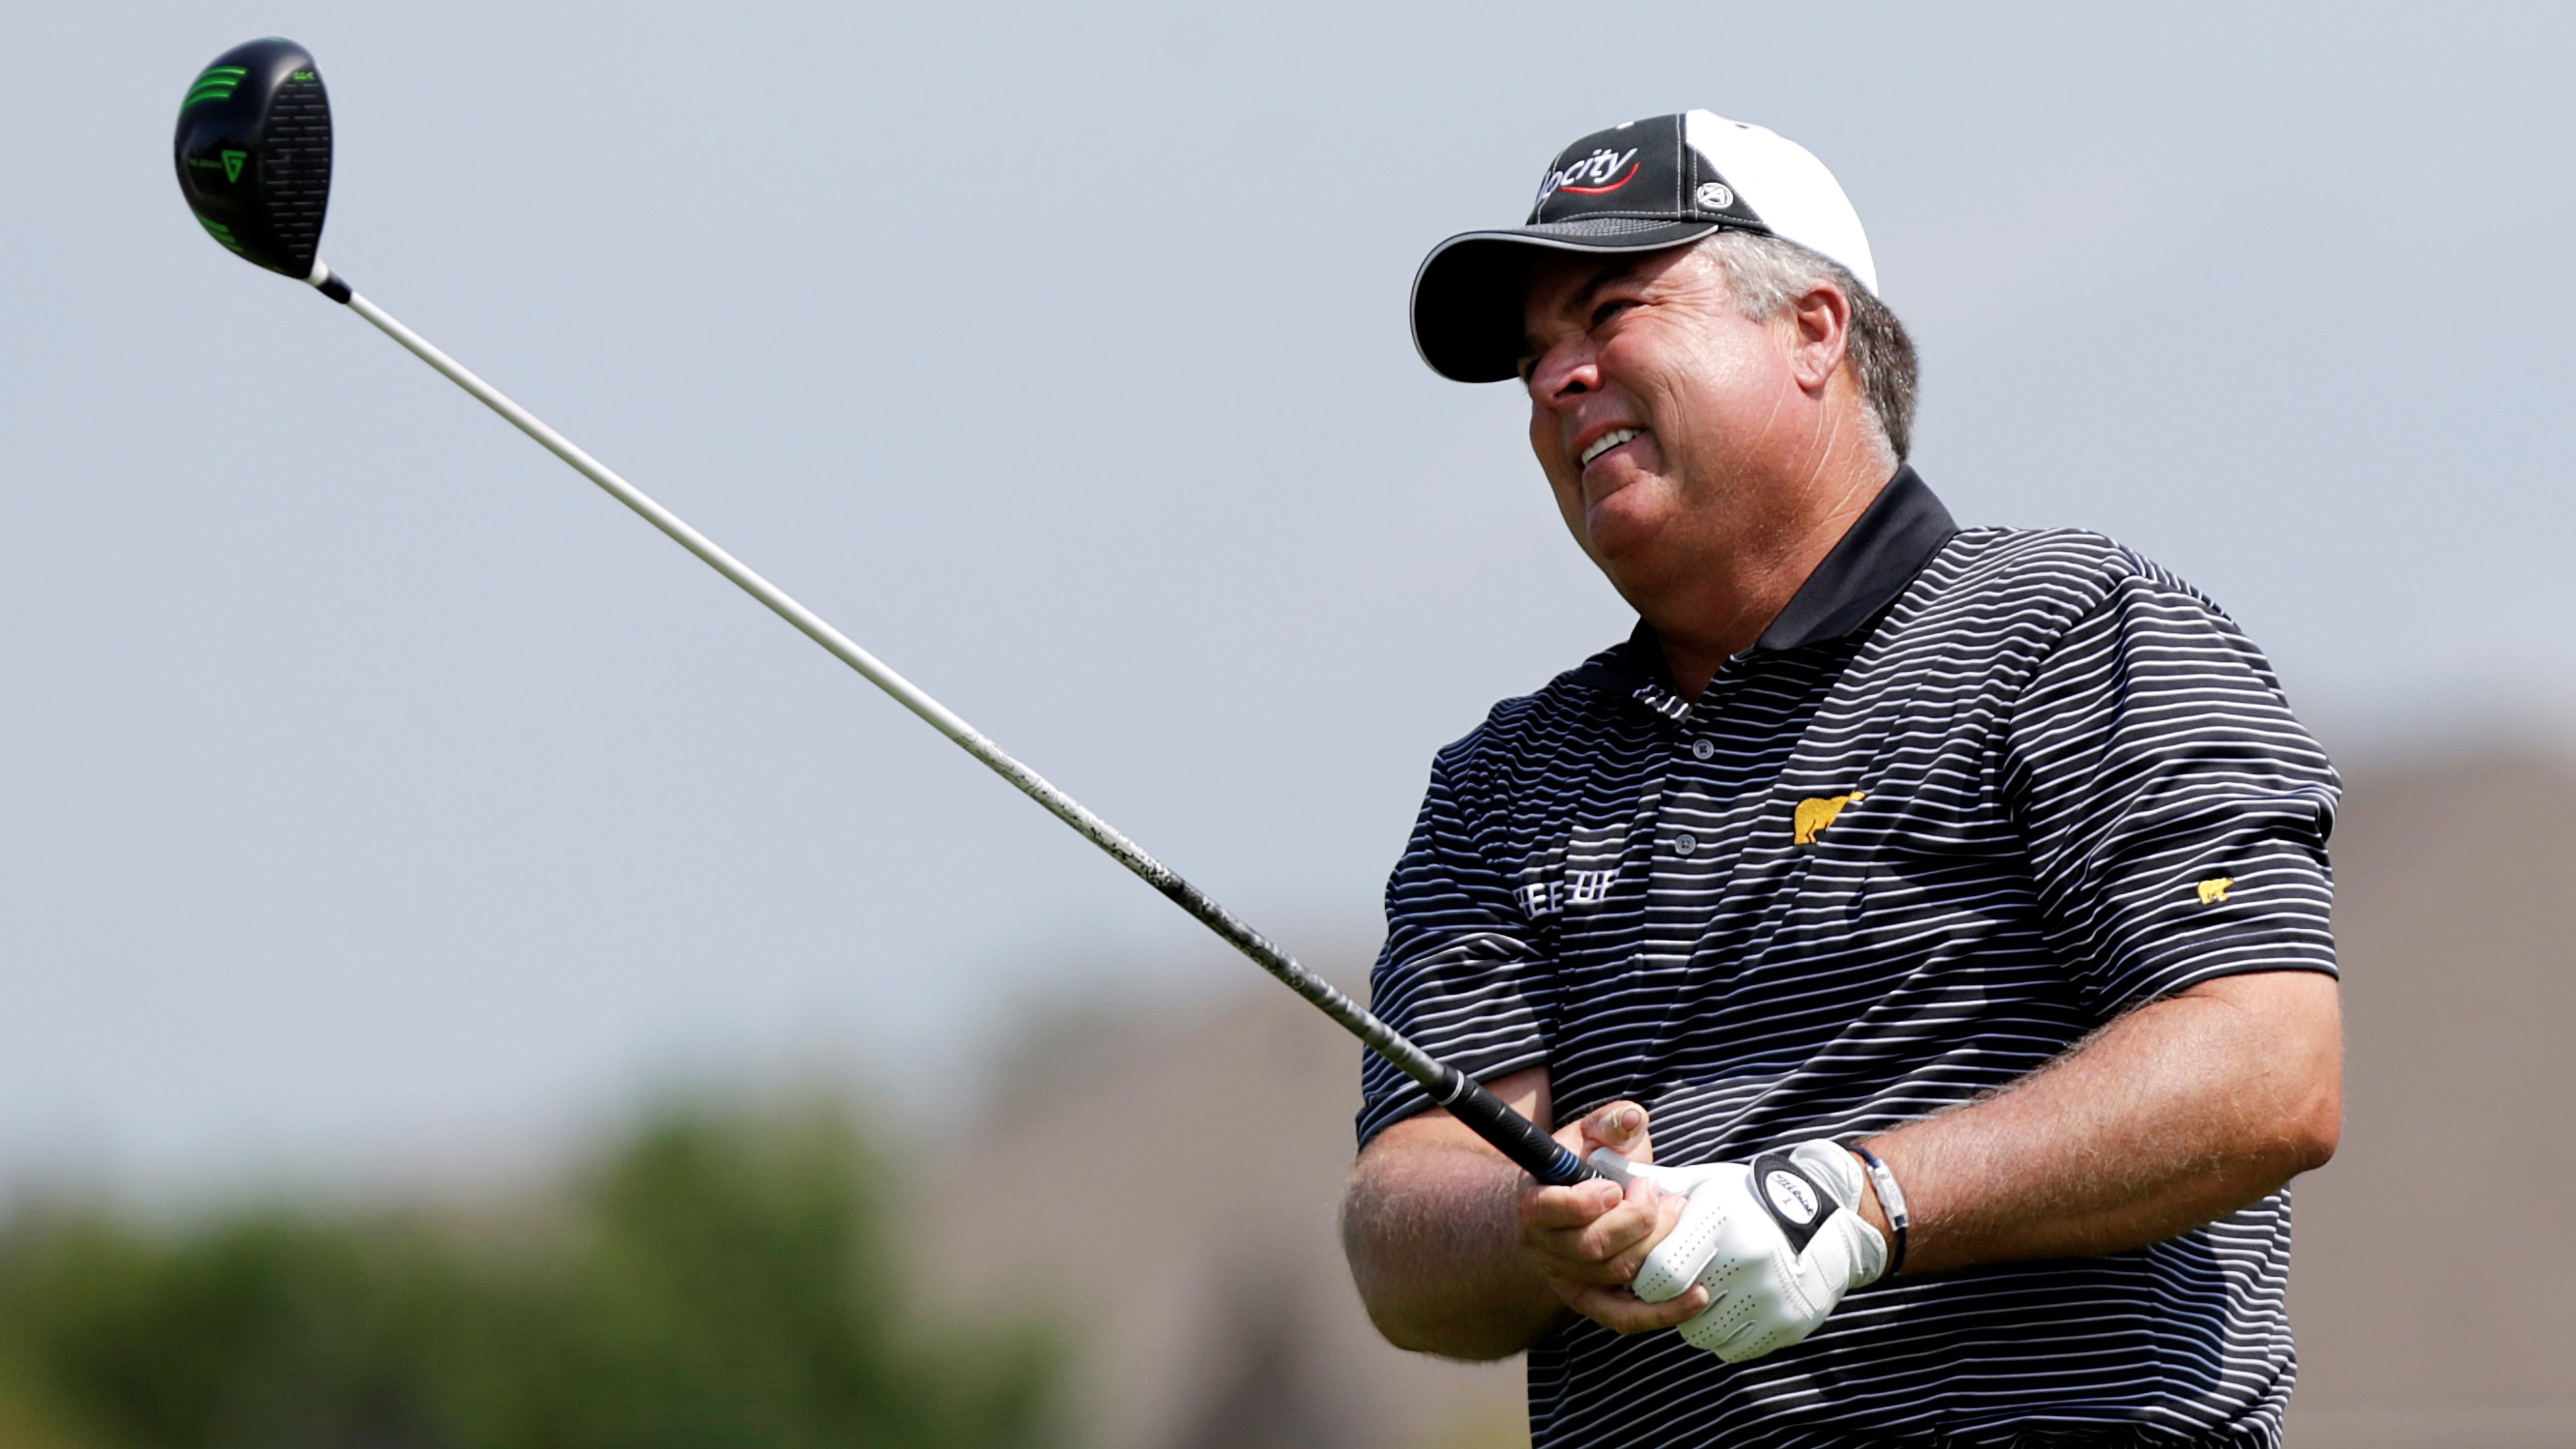 Kenny Perry leads Cologuard Classic, John Smoltz shoots 73